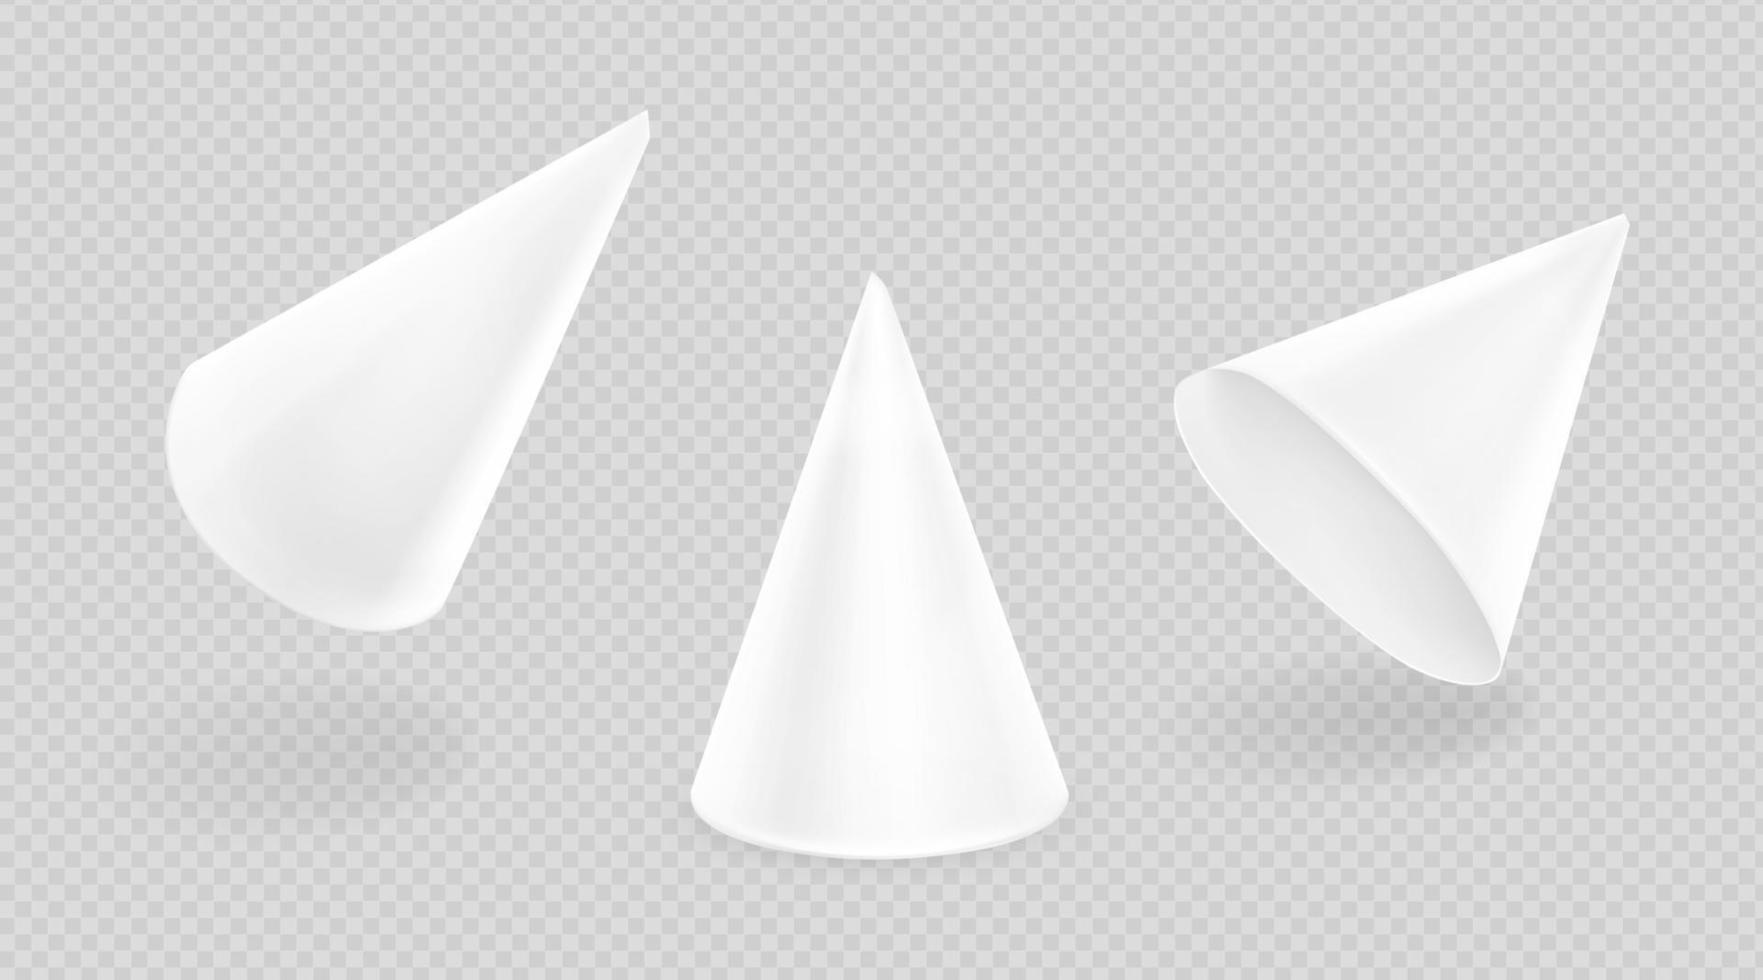 White party hats for birthday celebration vector